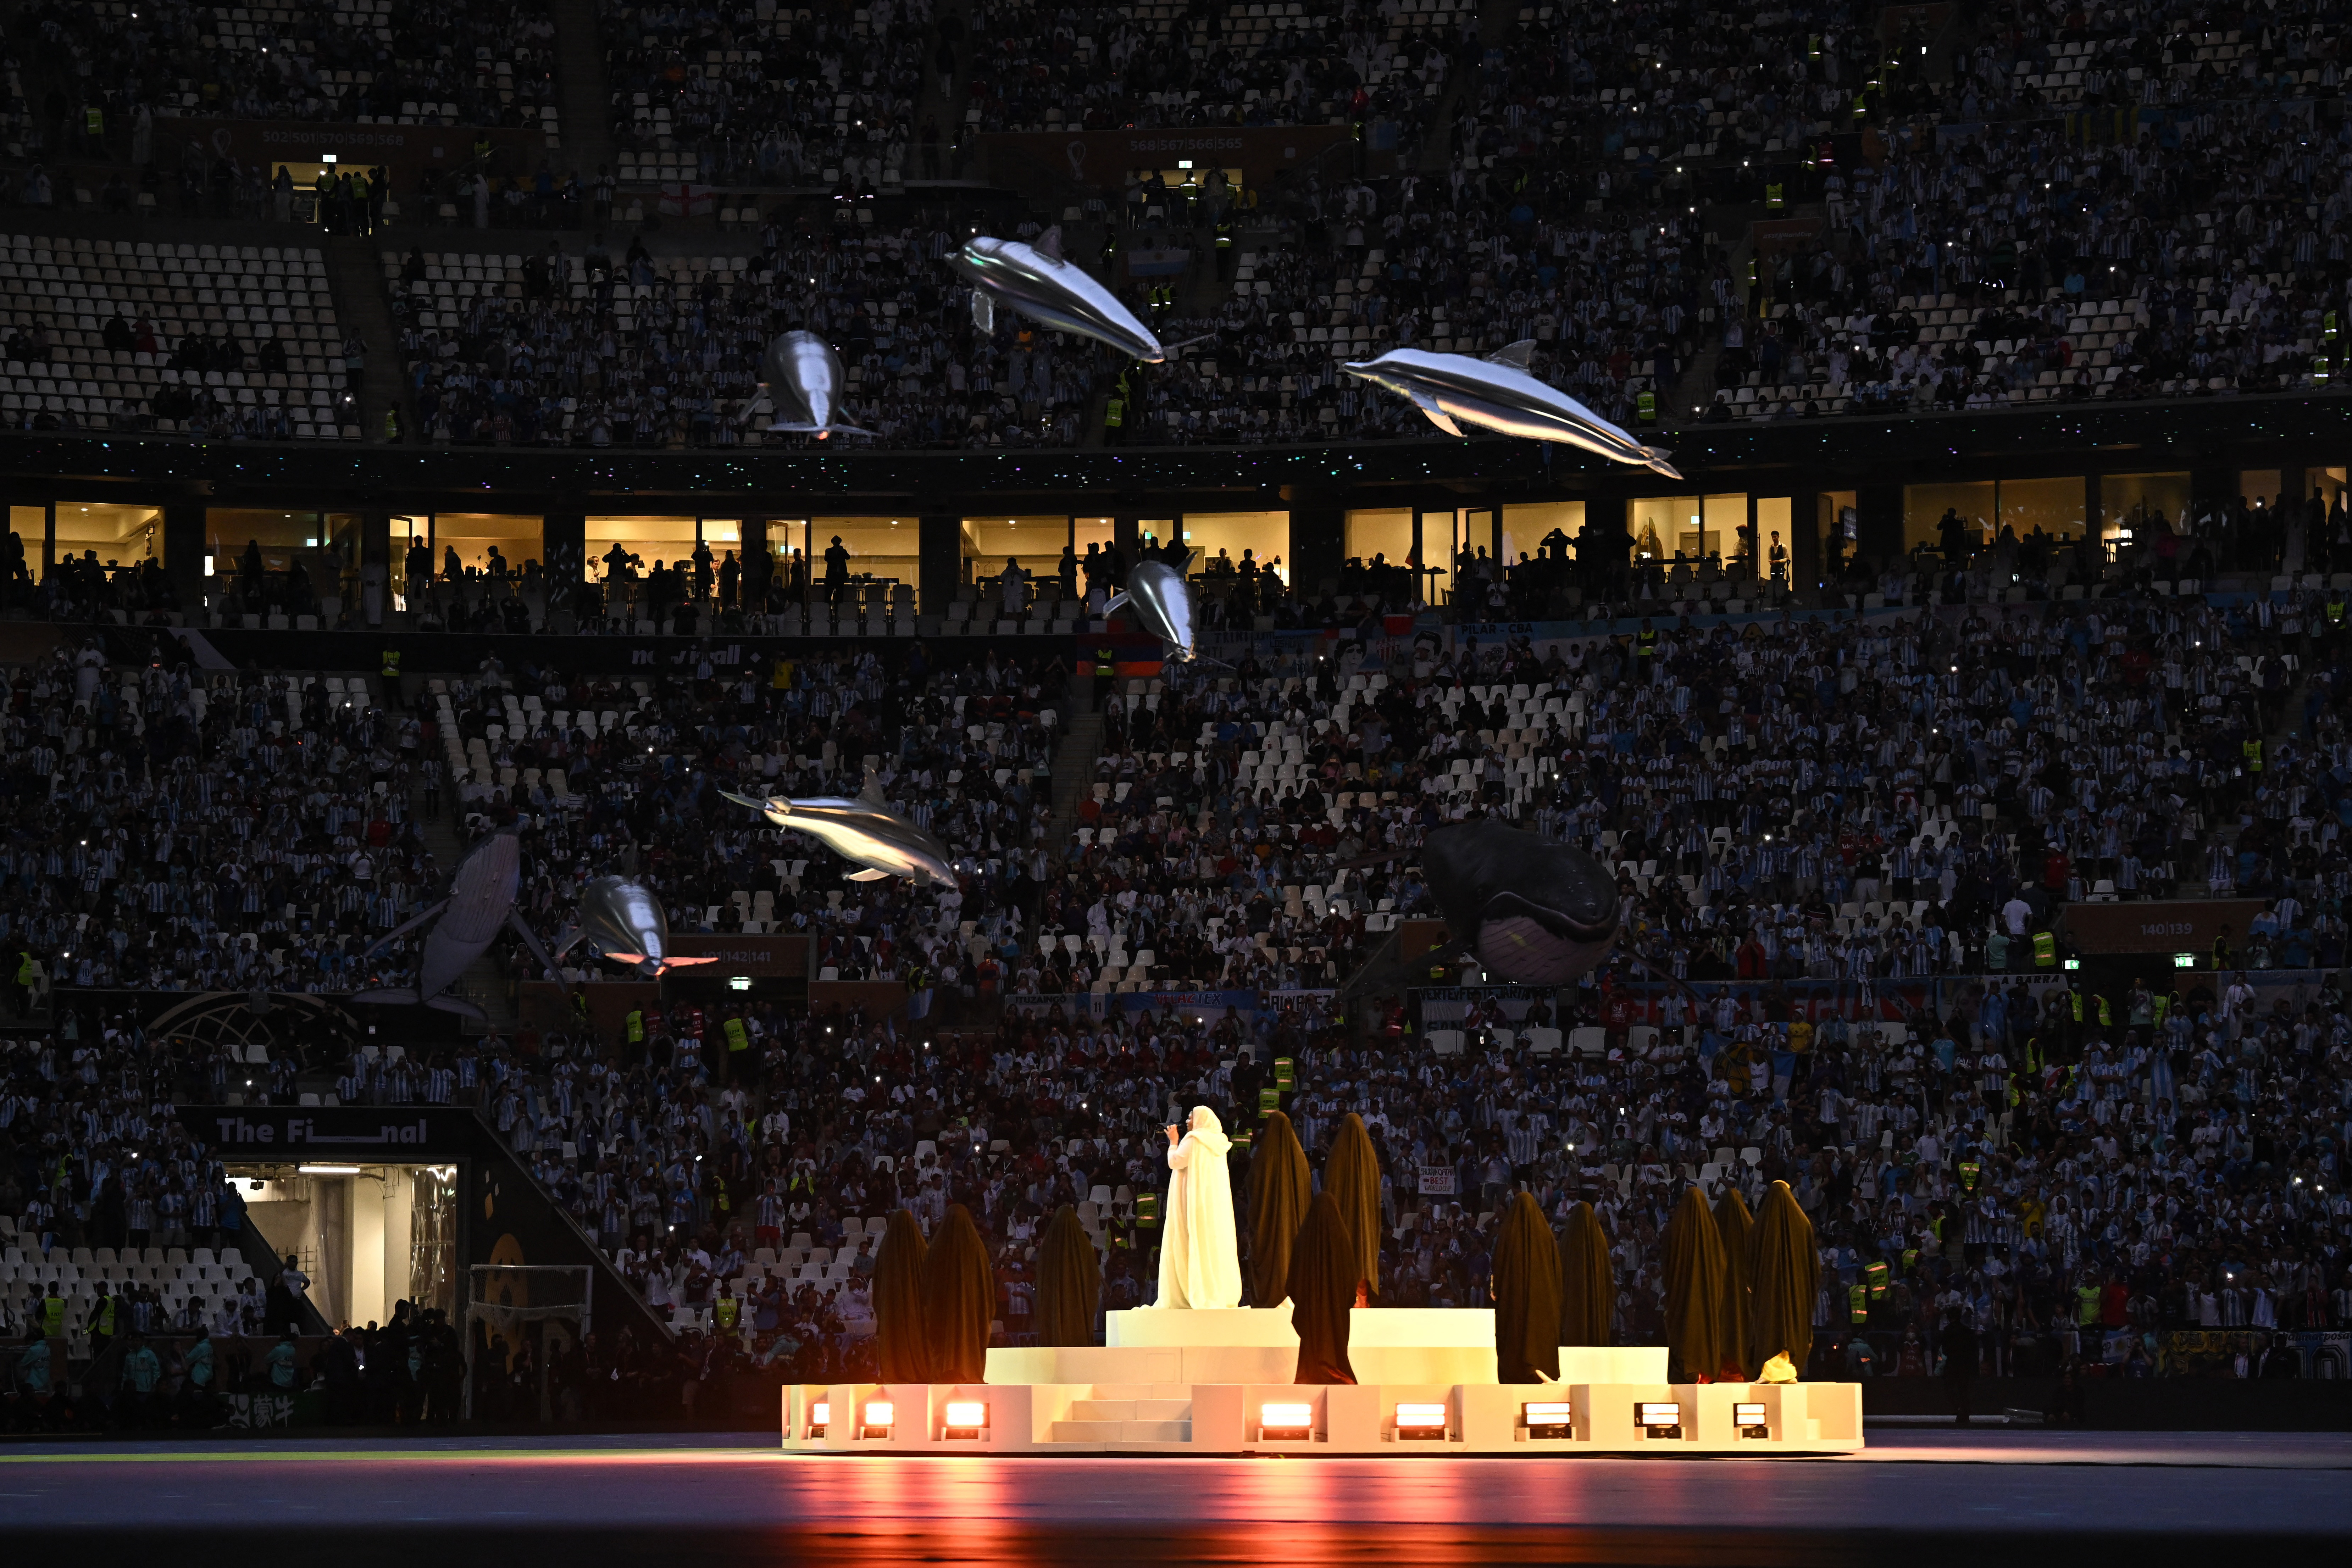 Football Football - FIFA World Cup Qatar 2022 - Final - Argentina v France - Lusail Stadium, Lusail, Qatar - December 18, 2022 A woman performs at the closing ceremony before the match REUTERS/Dylan Martinez